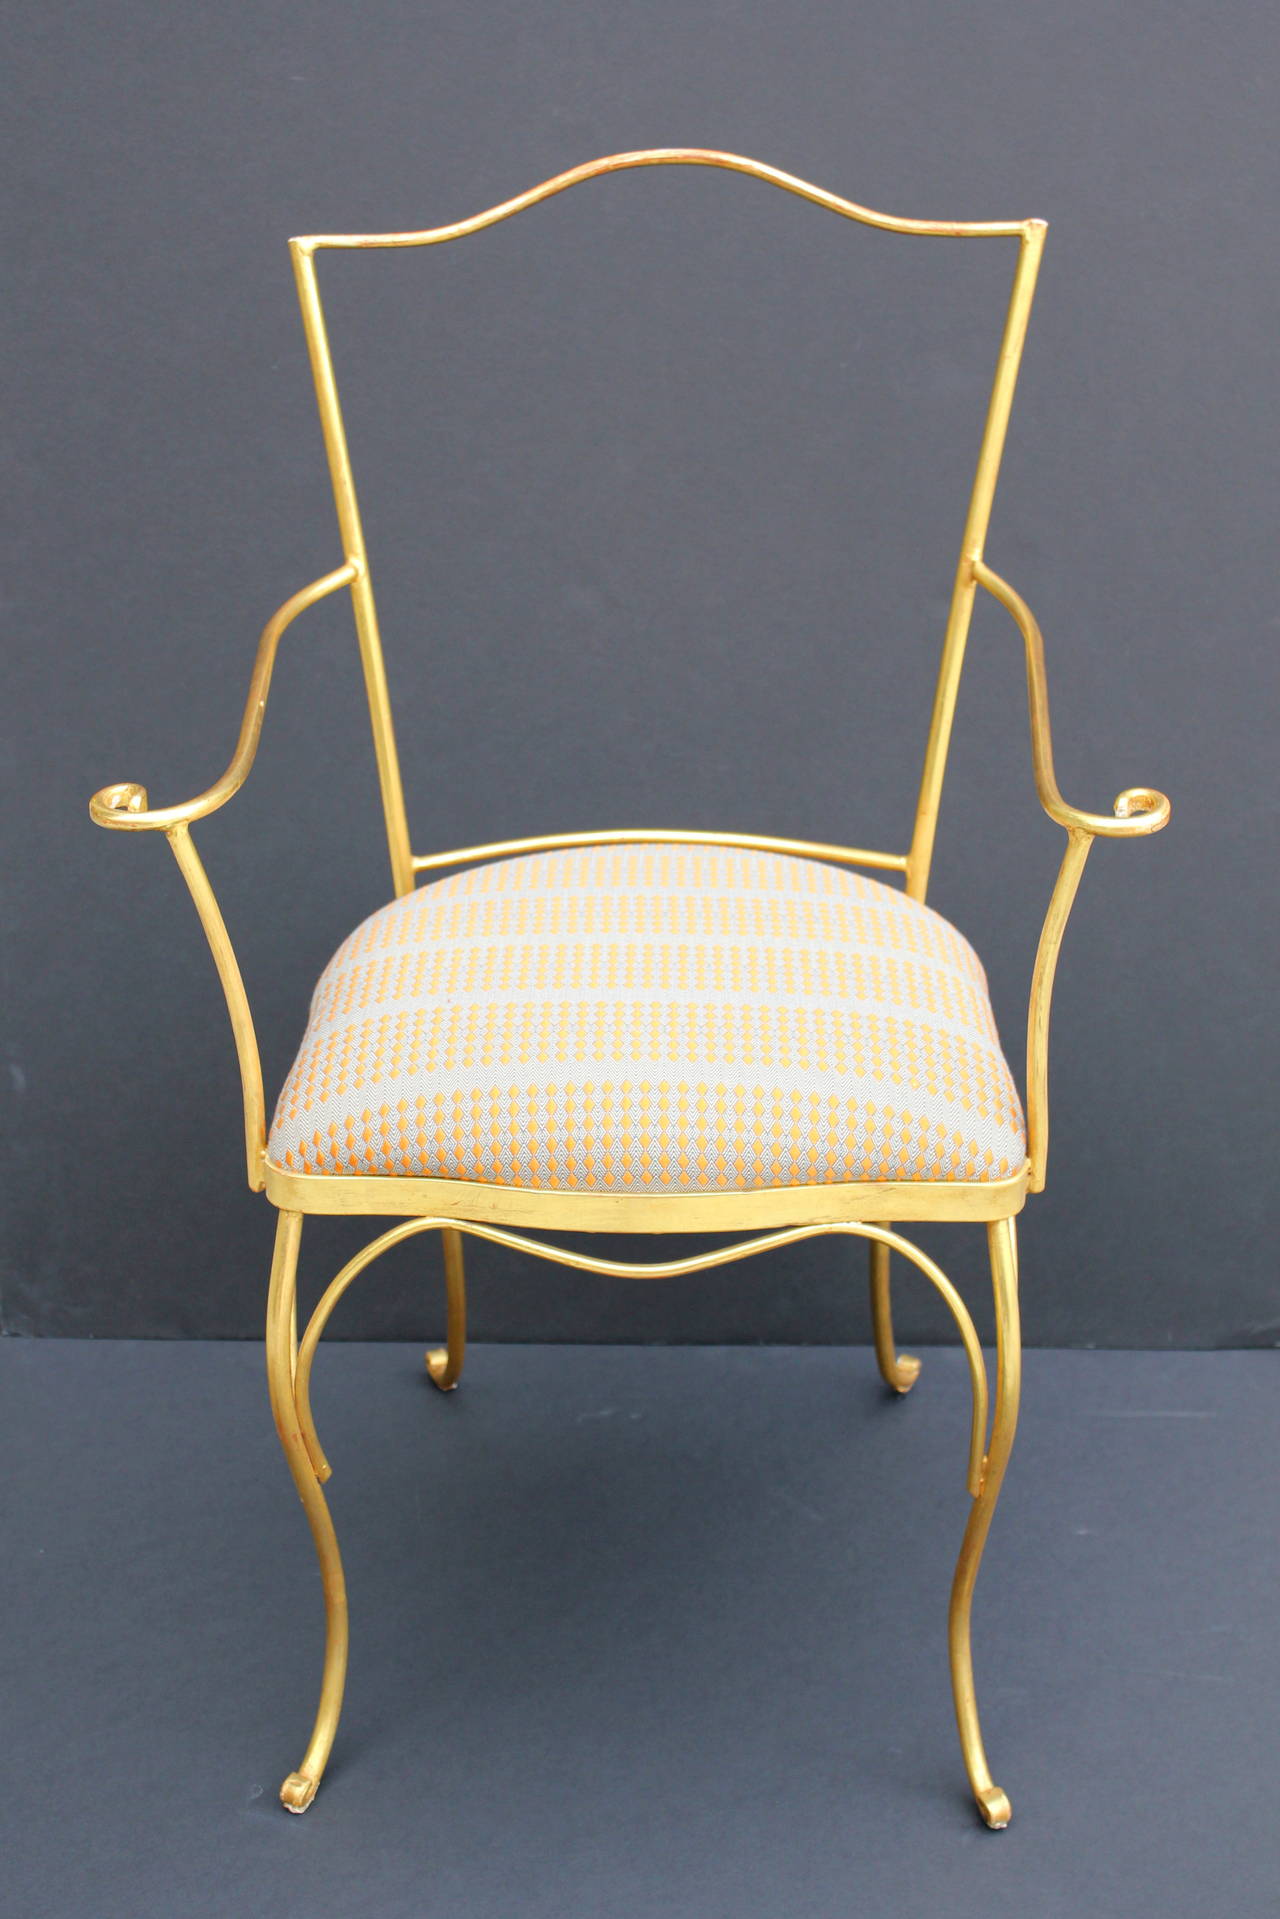 Upholstery French Gilt Chair